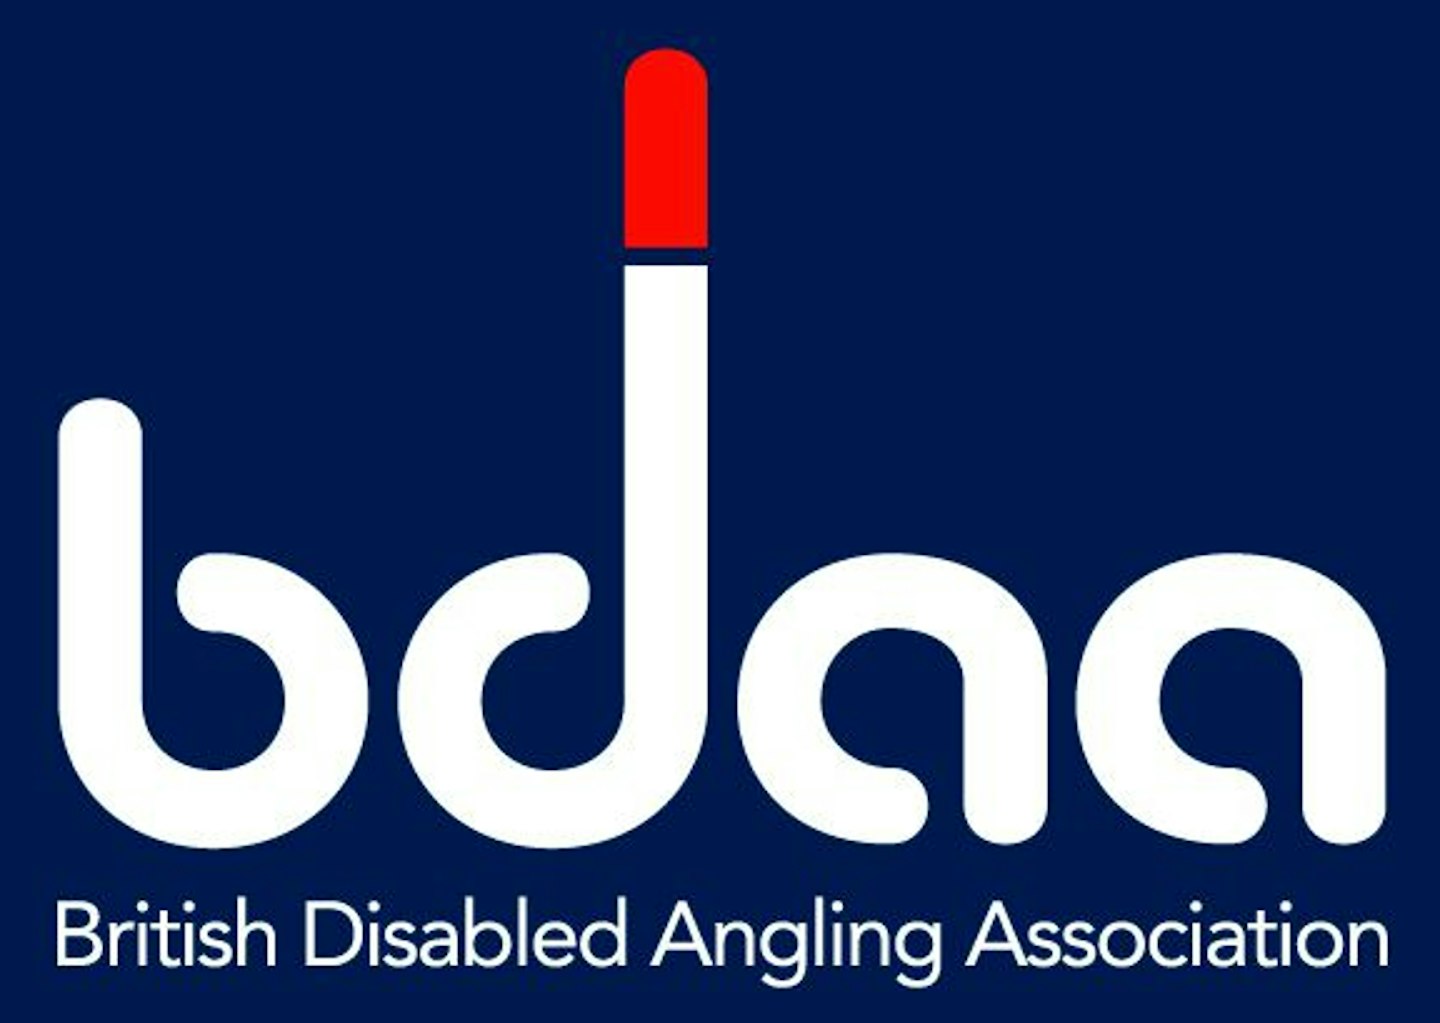 Angling and disability: Are we doing enough?